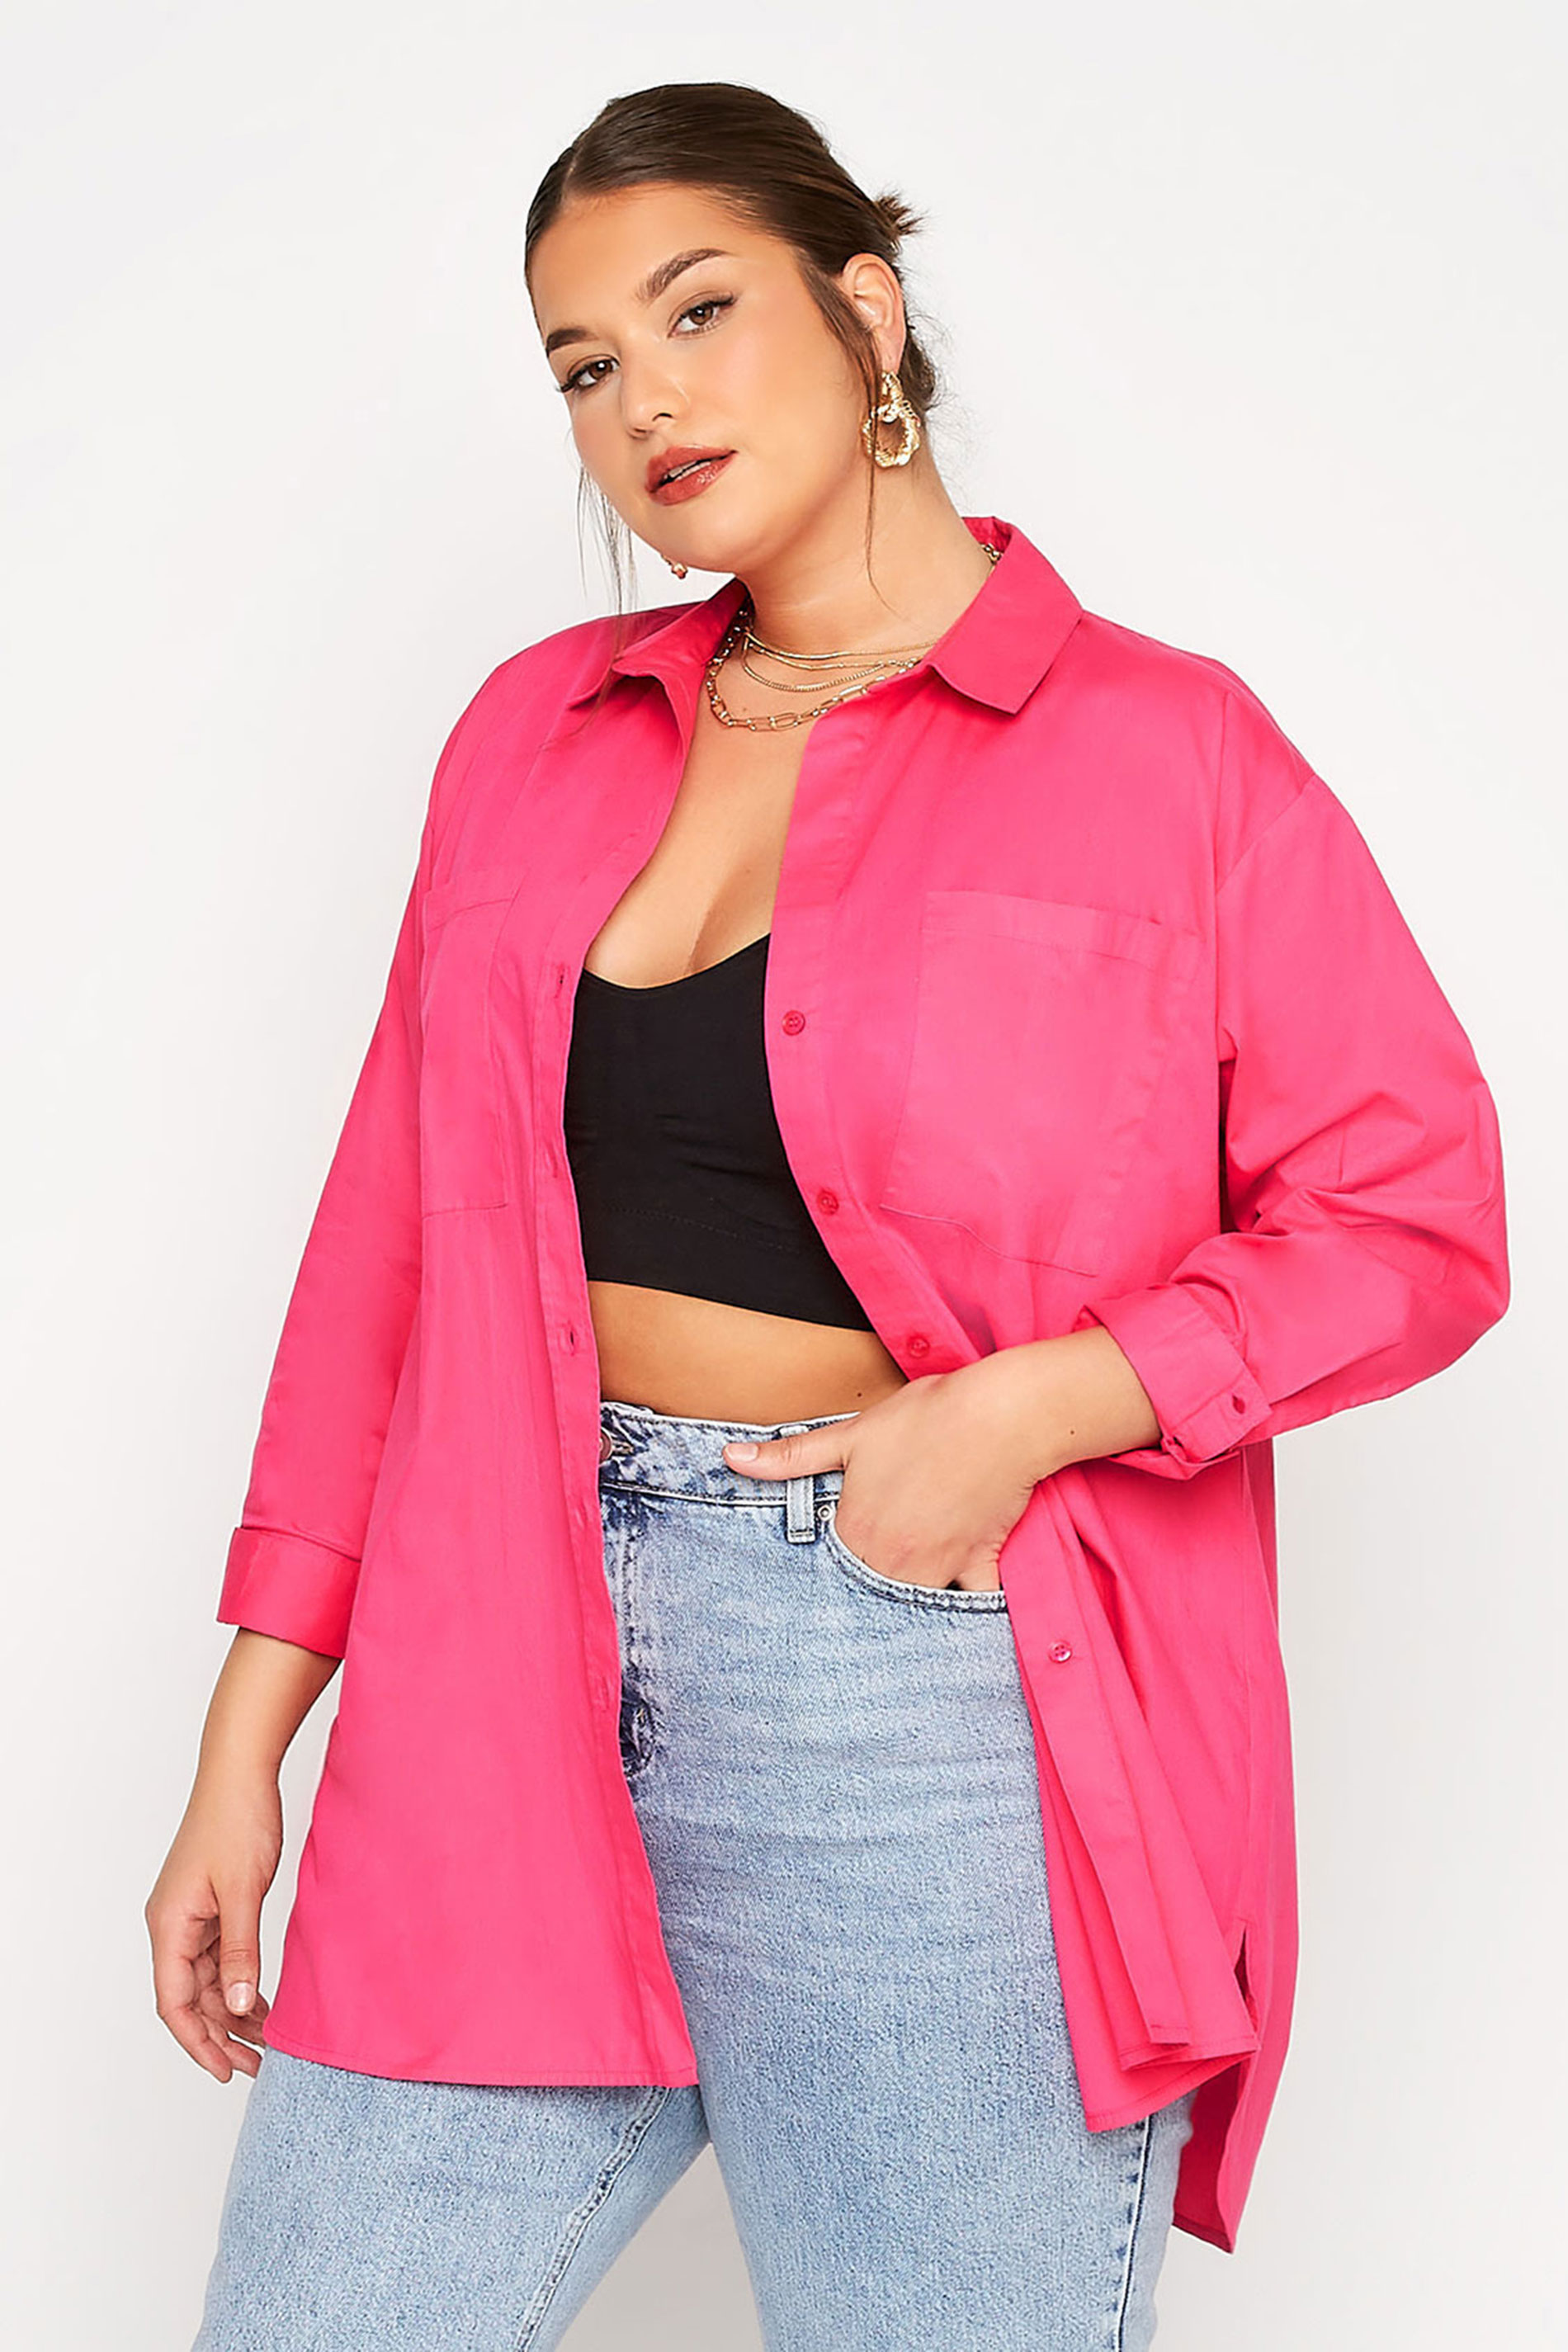 LIMITED COLLECTION Curve Hot Pink Oversized Boyfriend Shirt 1